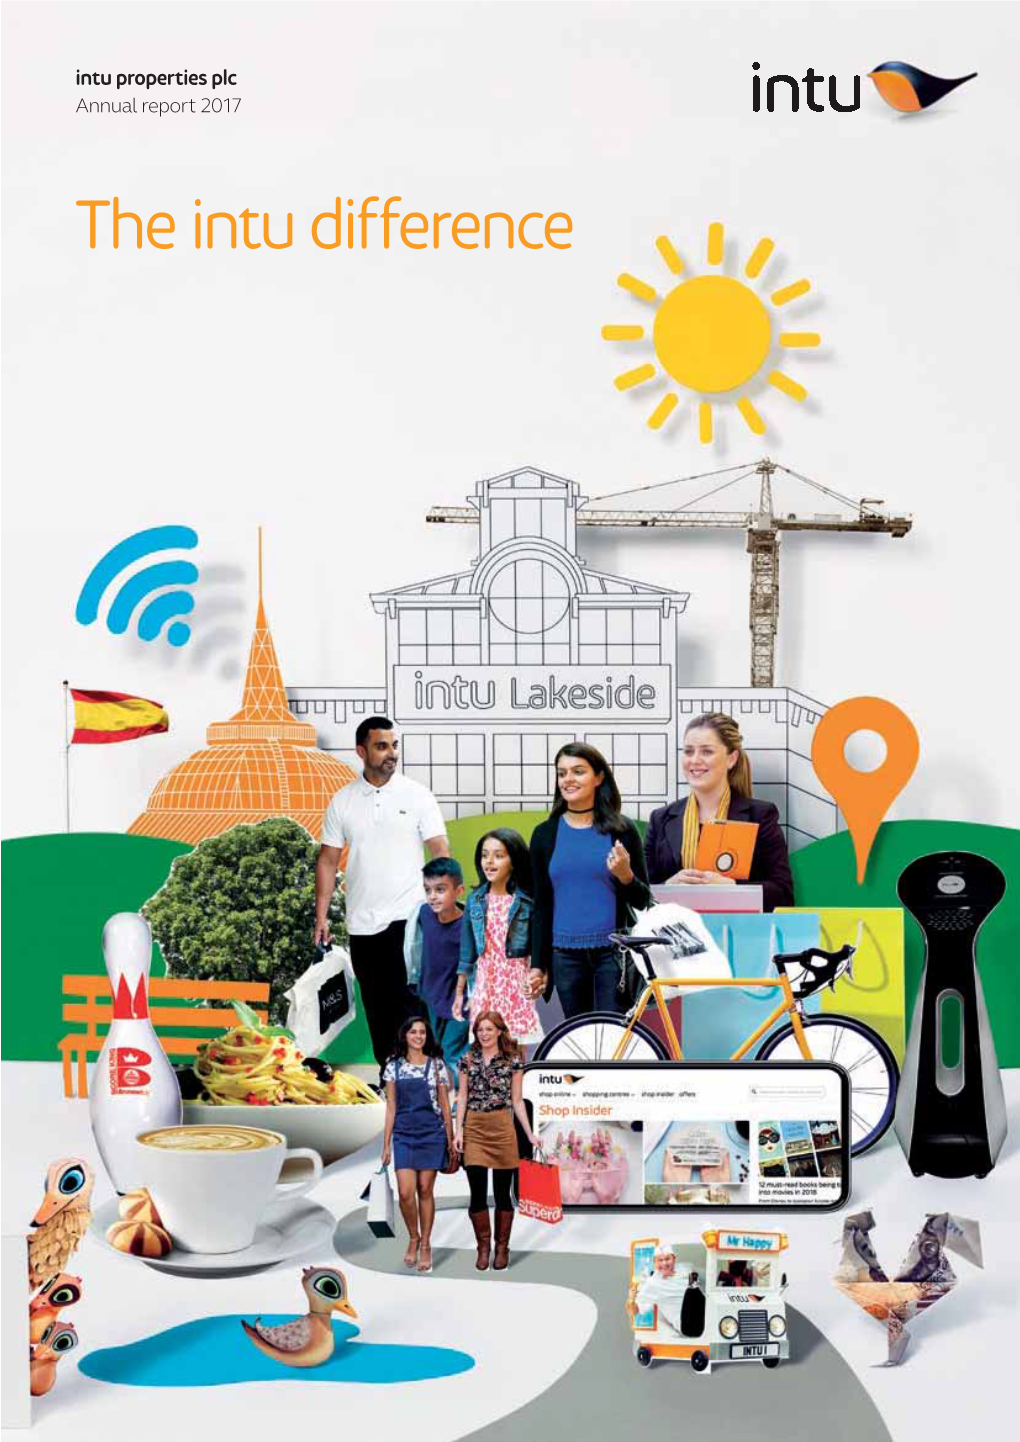 The Intu Difference Worldreginfo - 8Fbc41b6-12Bd-4426-9A4e-16Df5a68ef8c Welcome to Our Annual Report 2017